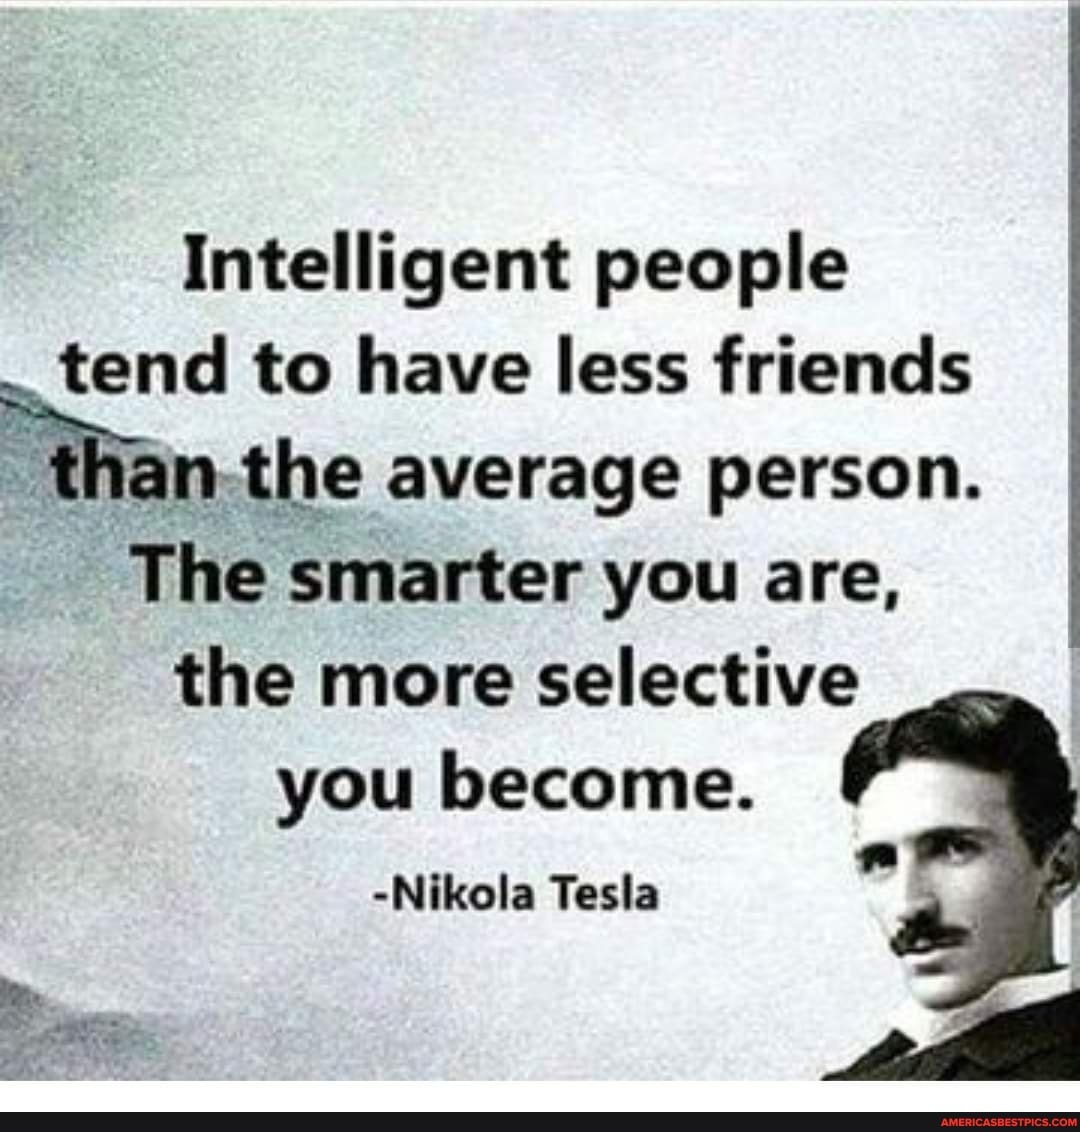 intelligent people tend to have less friends than the average kRdRwsLE9